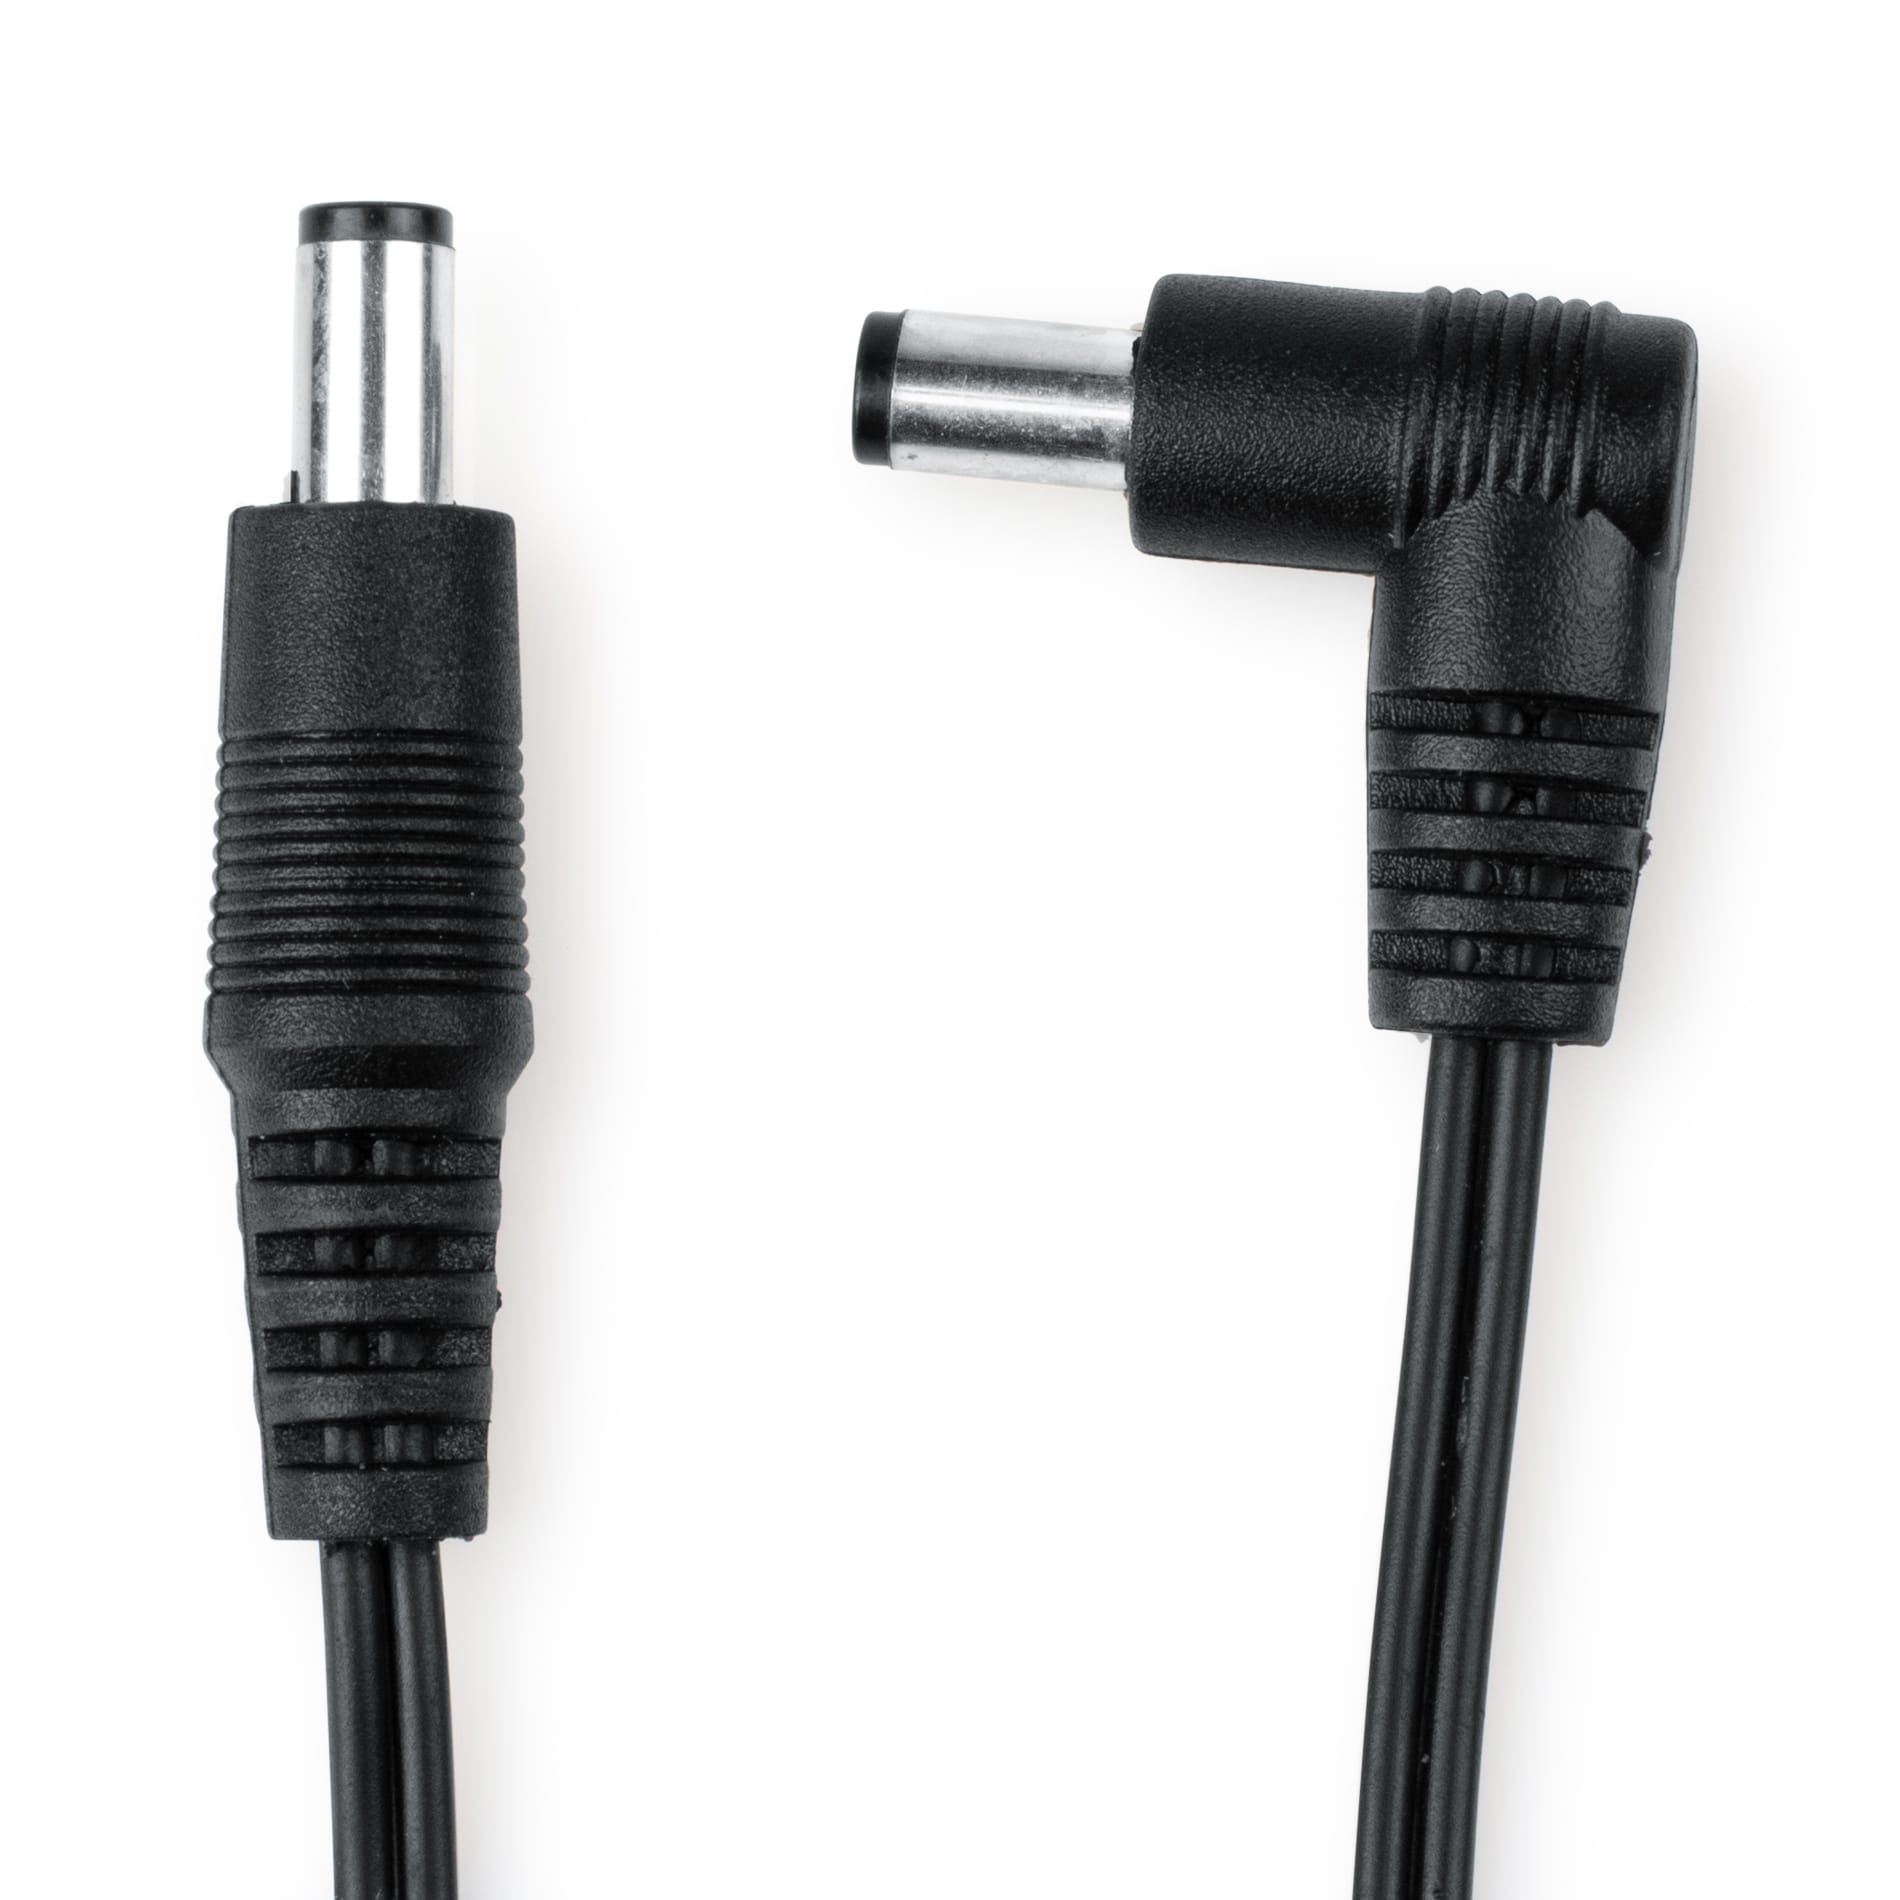 Single DC Power Cable for Pedals - 40